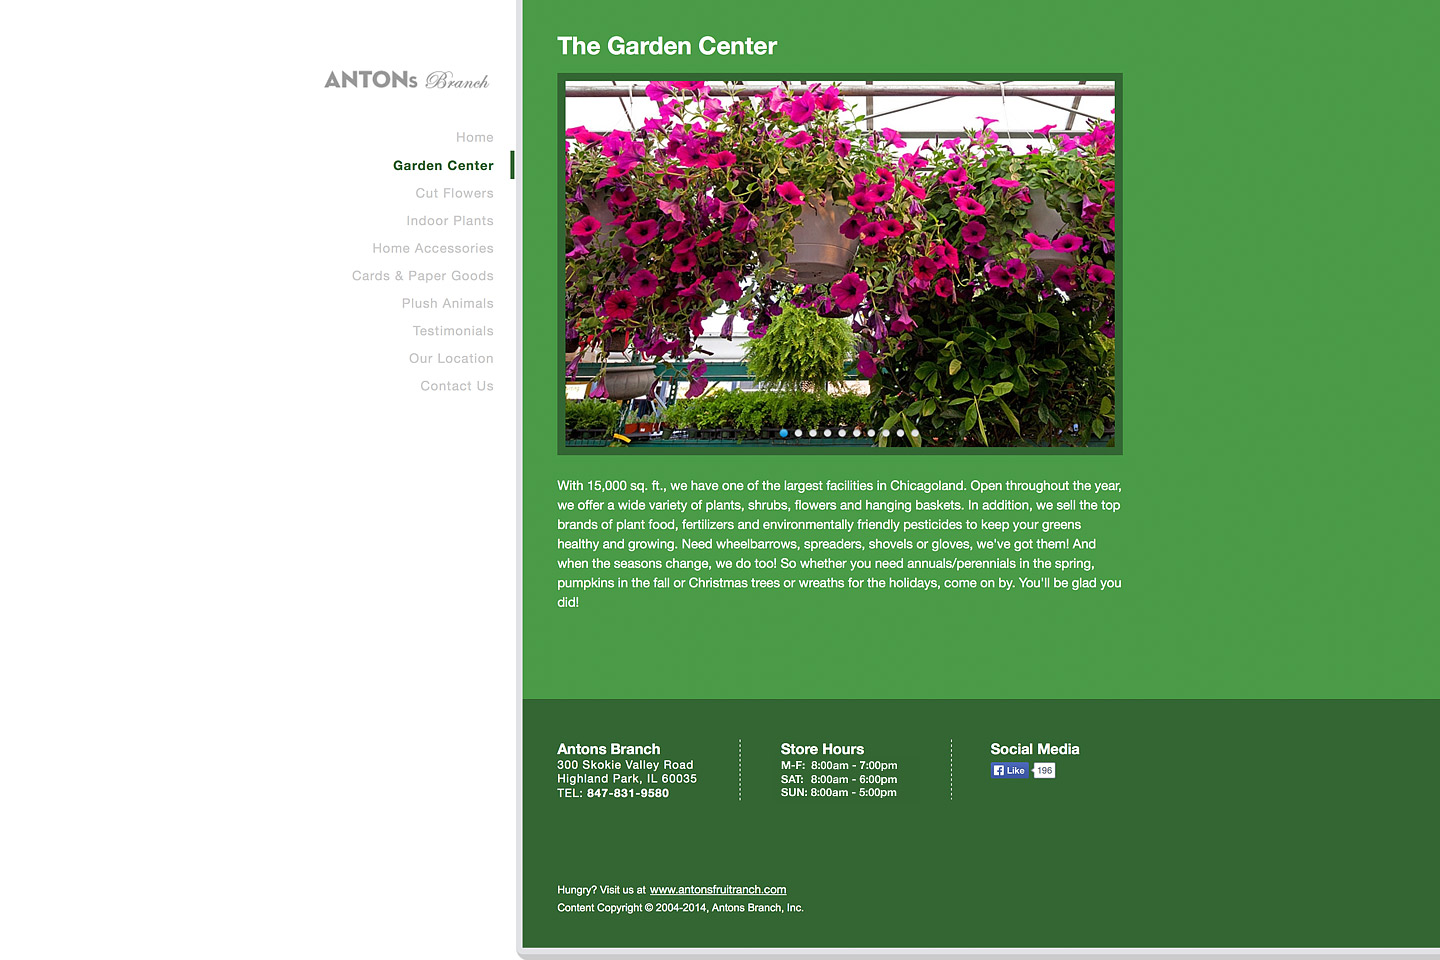 a screen capture of the garden center page, featuring several hanging baskets of purple petunias for sale in the antons branch green house